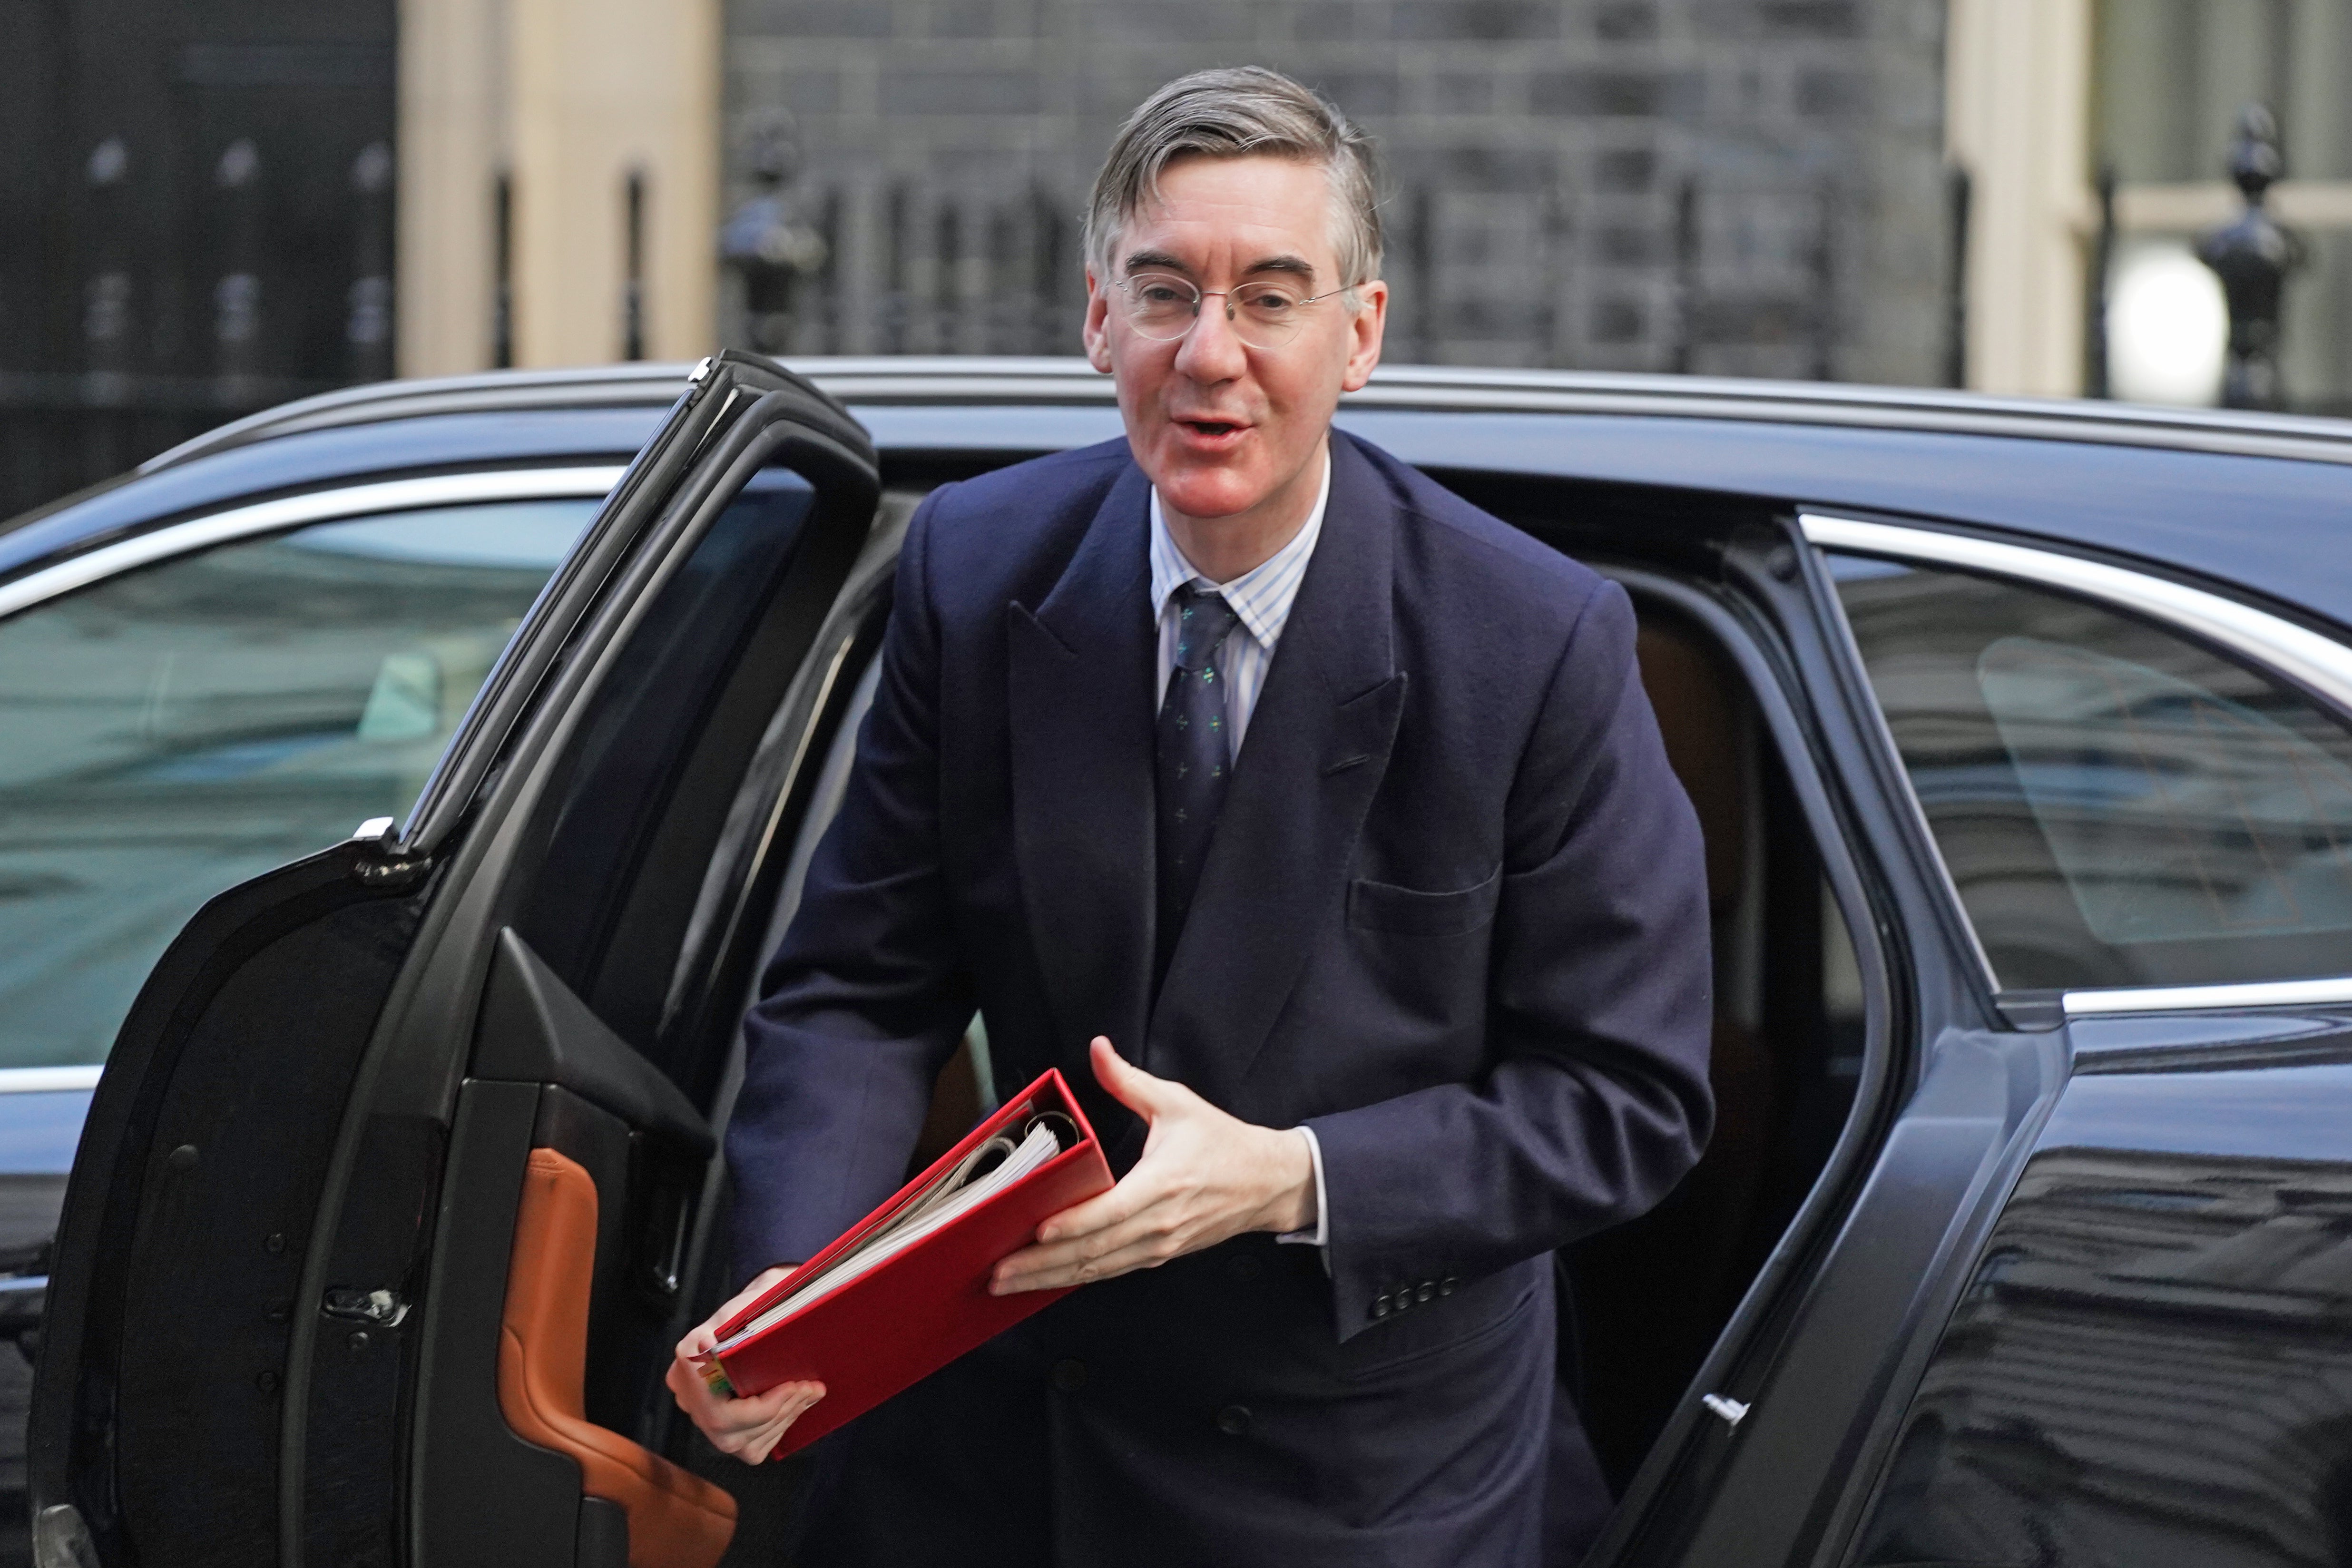 Jacob Rees-Mogg has been appointed minister for Brexit opportunities